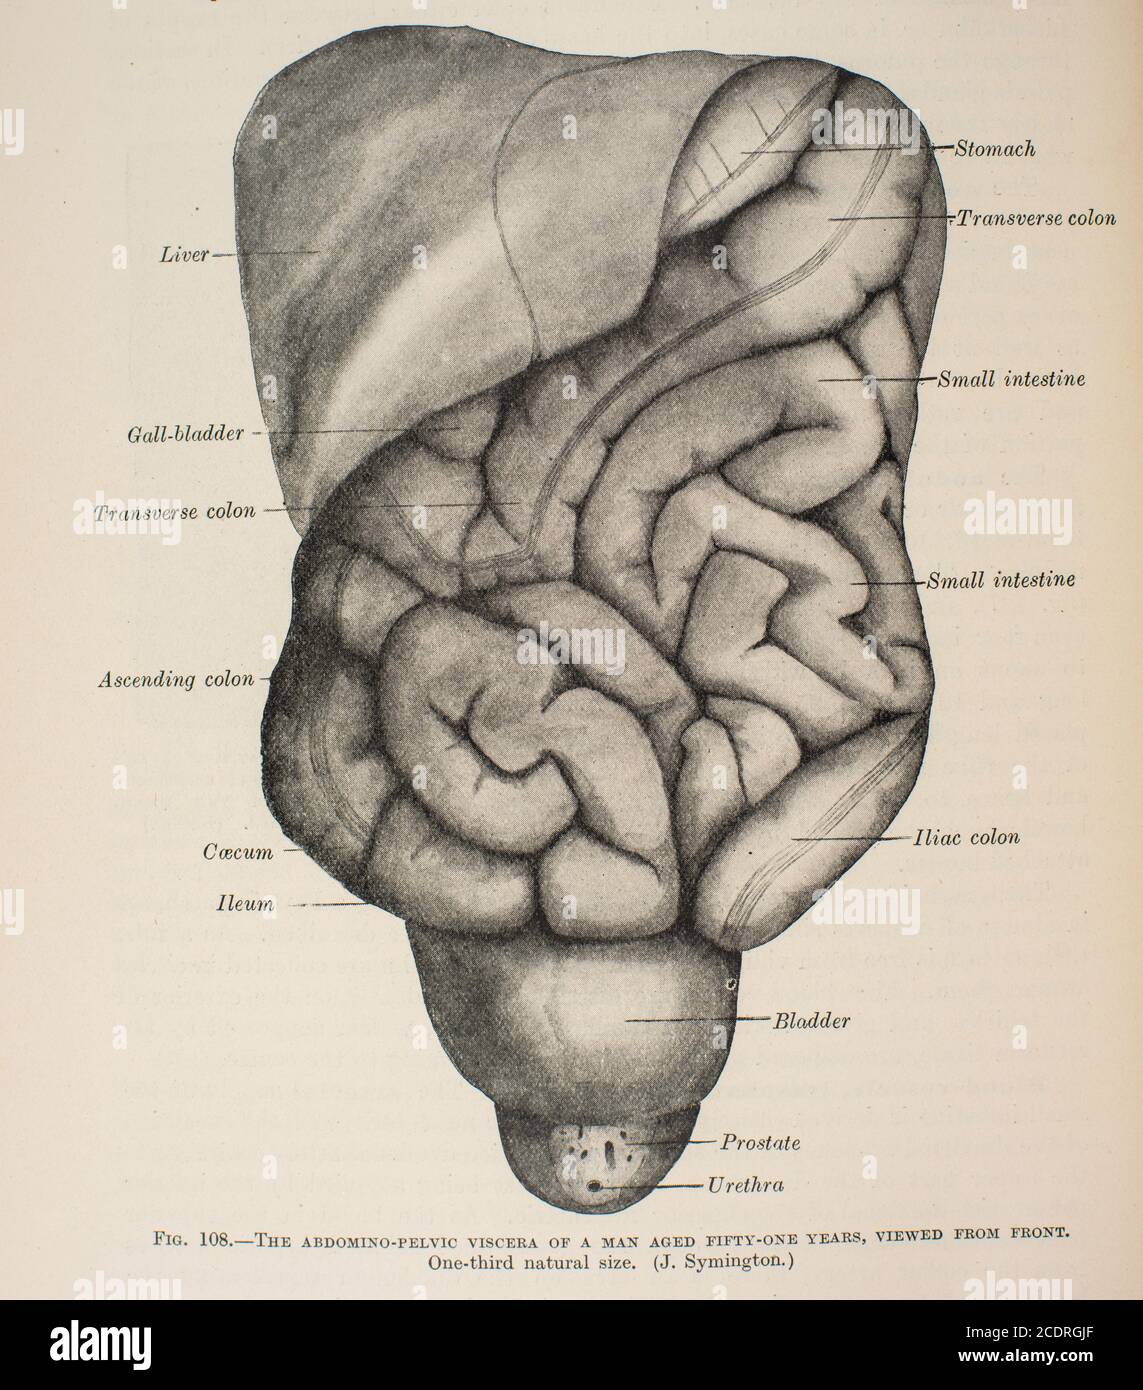 Quain's Elements of Anatomy Col. III published in 1896, abdominal/pelvic, male. Stock Photo